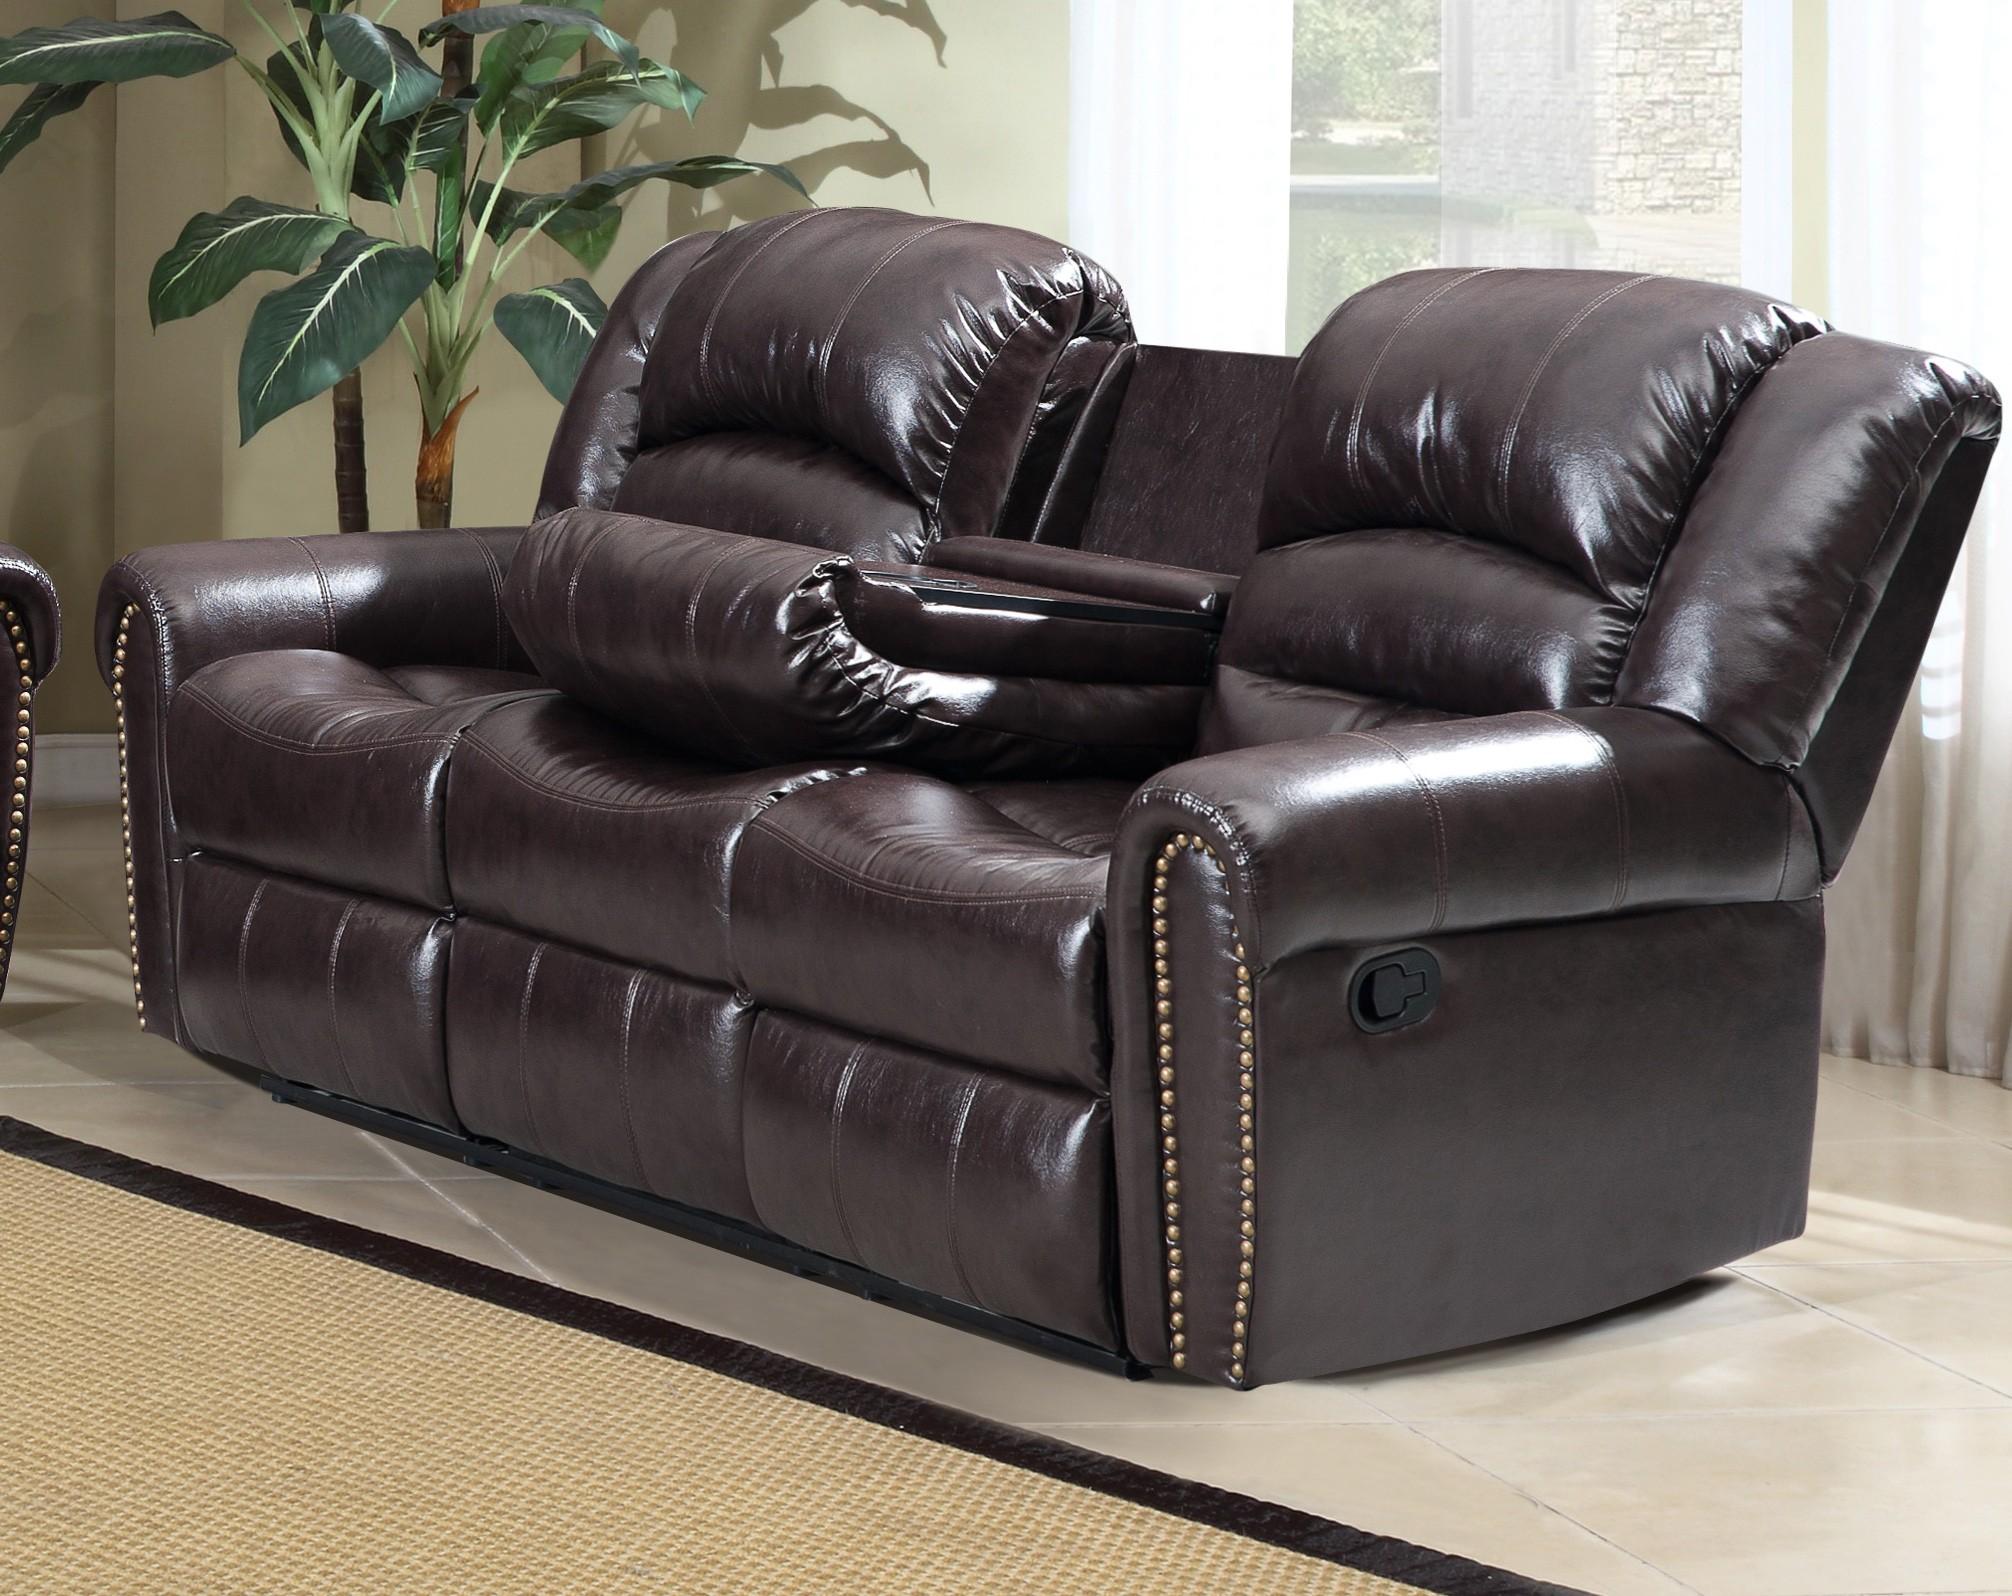 

    
Meridian 684 Chelsea Living Room Sofa in Brown Bonded Leather Contemporary Style
